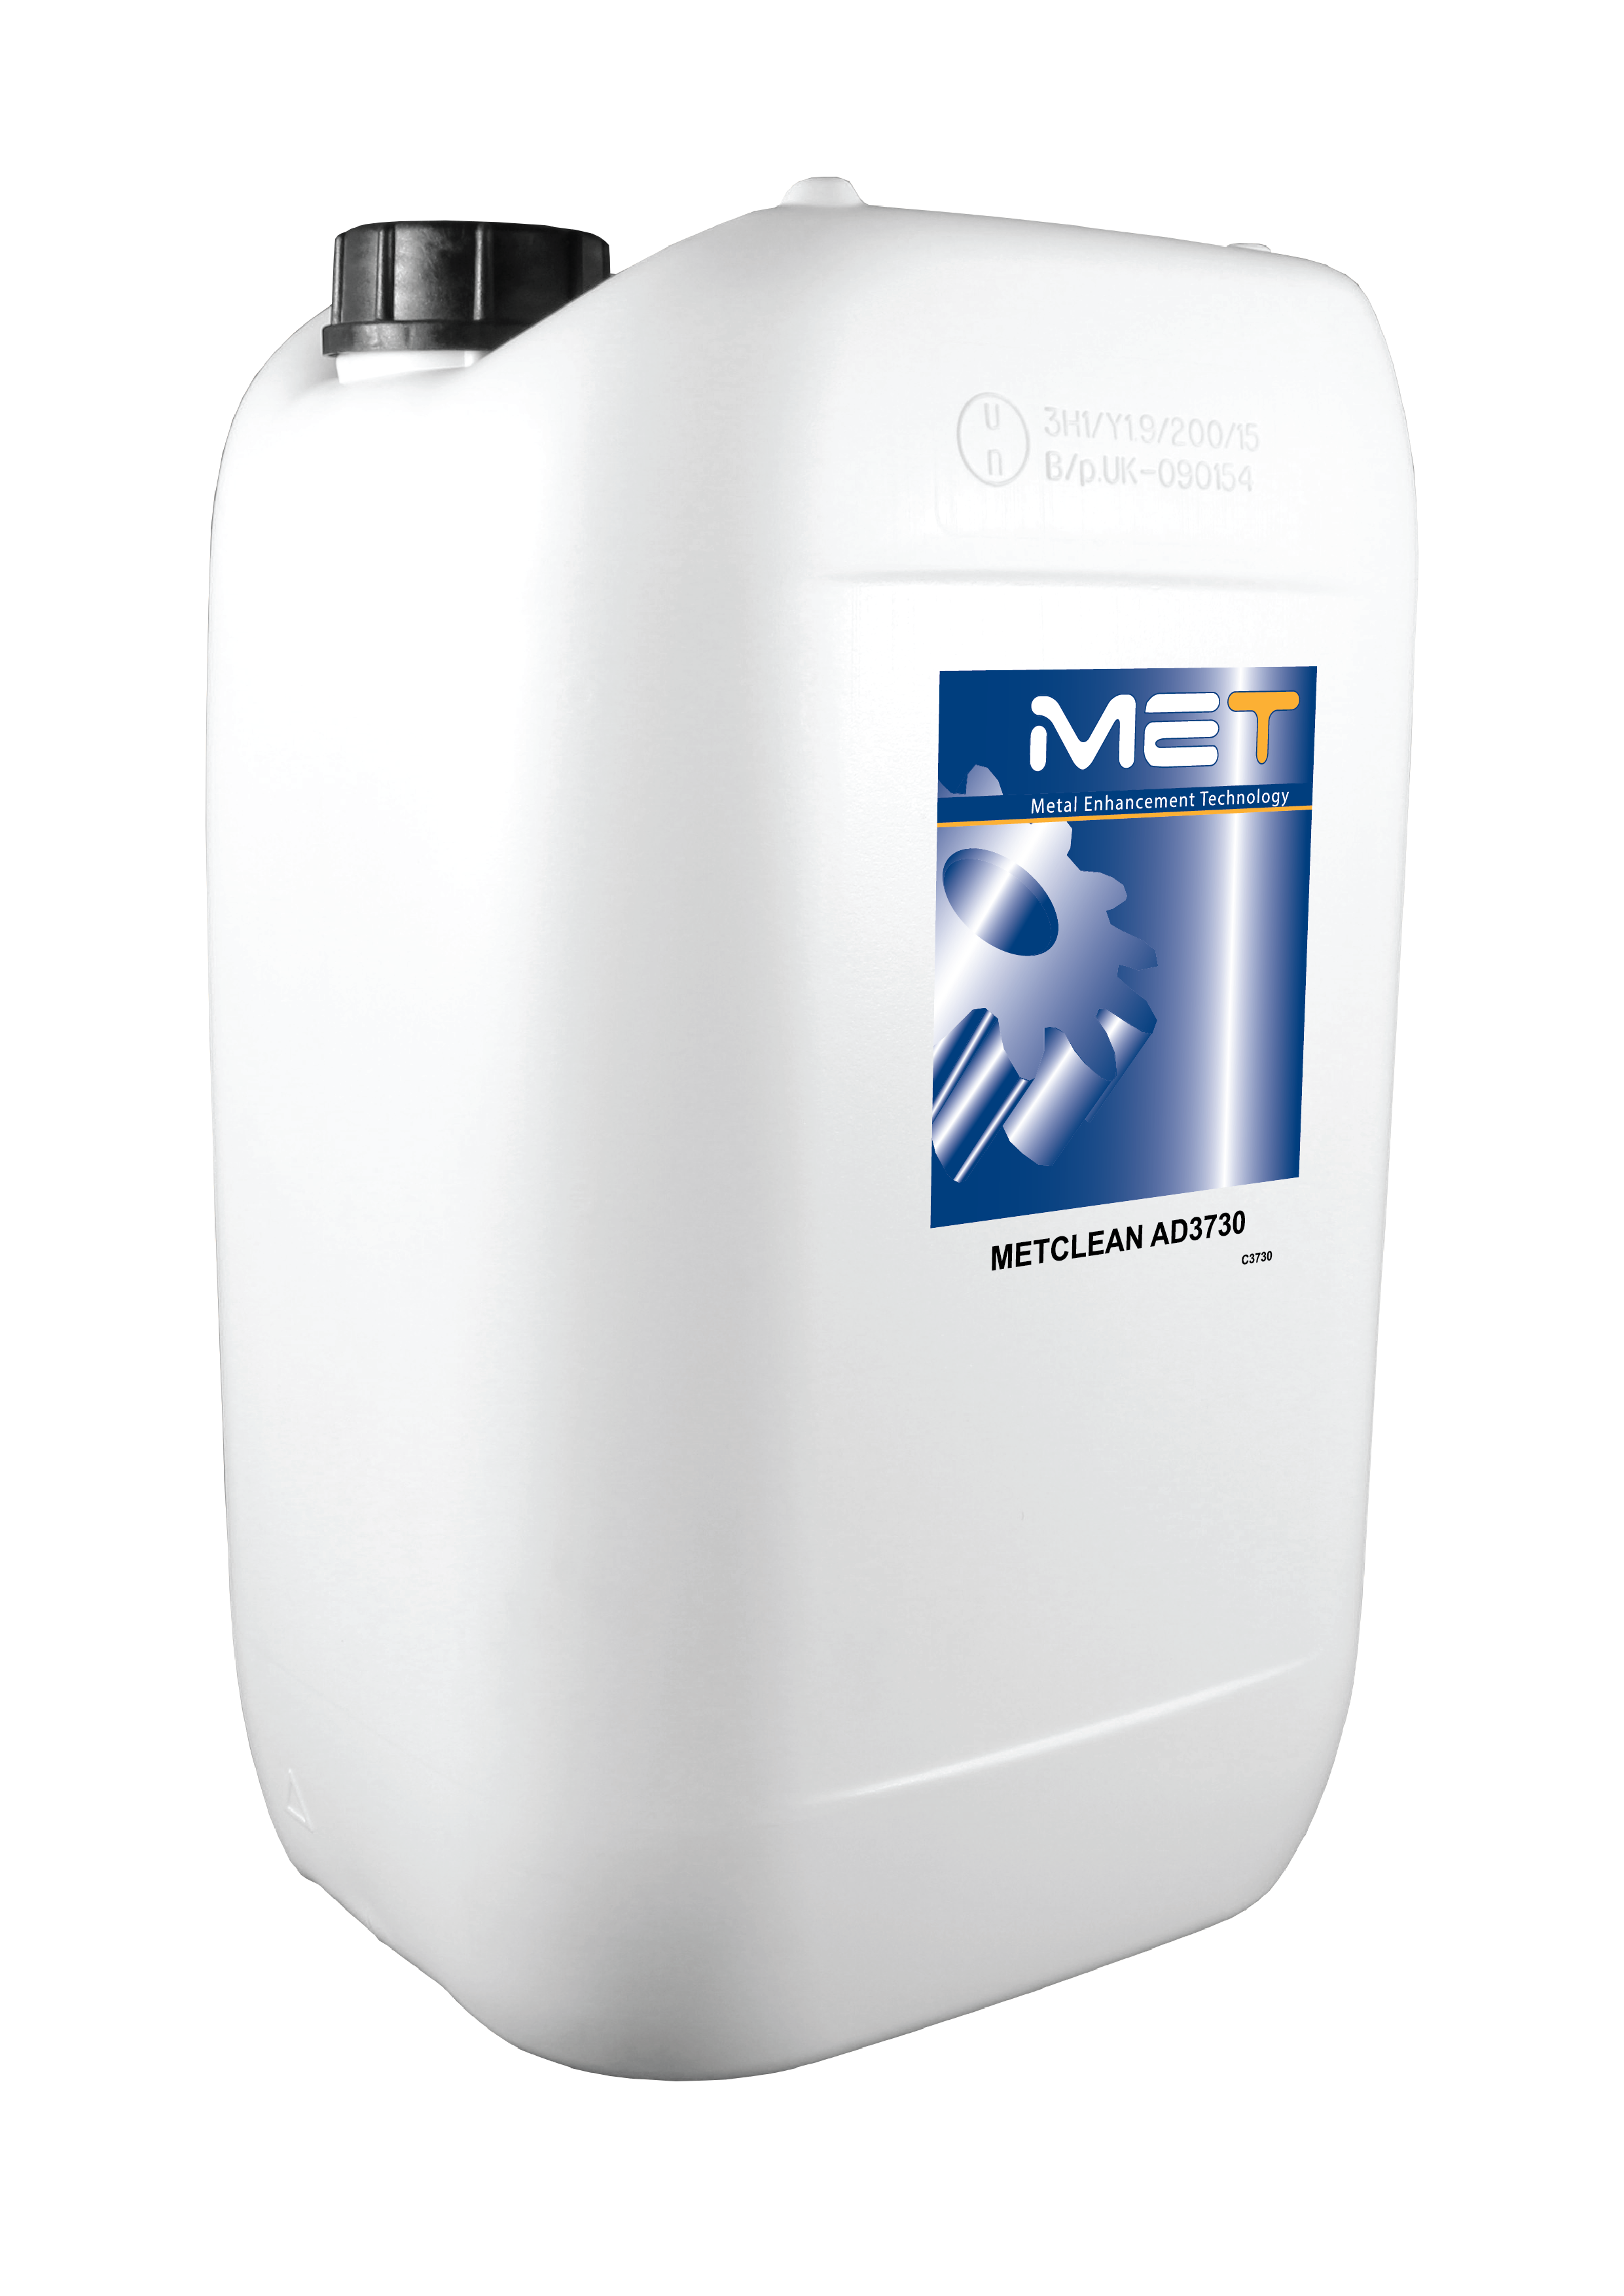 Metclean AD3730